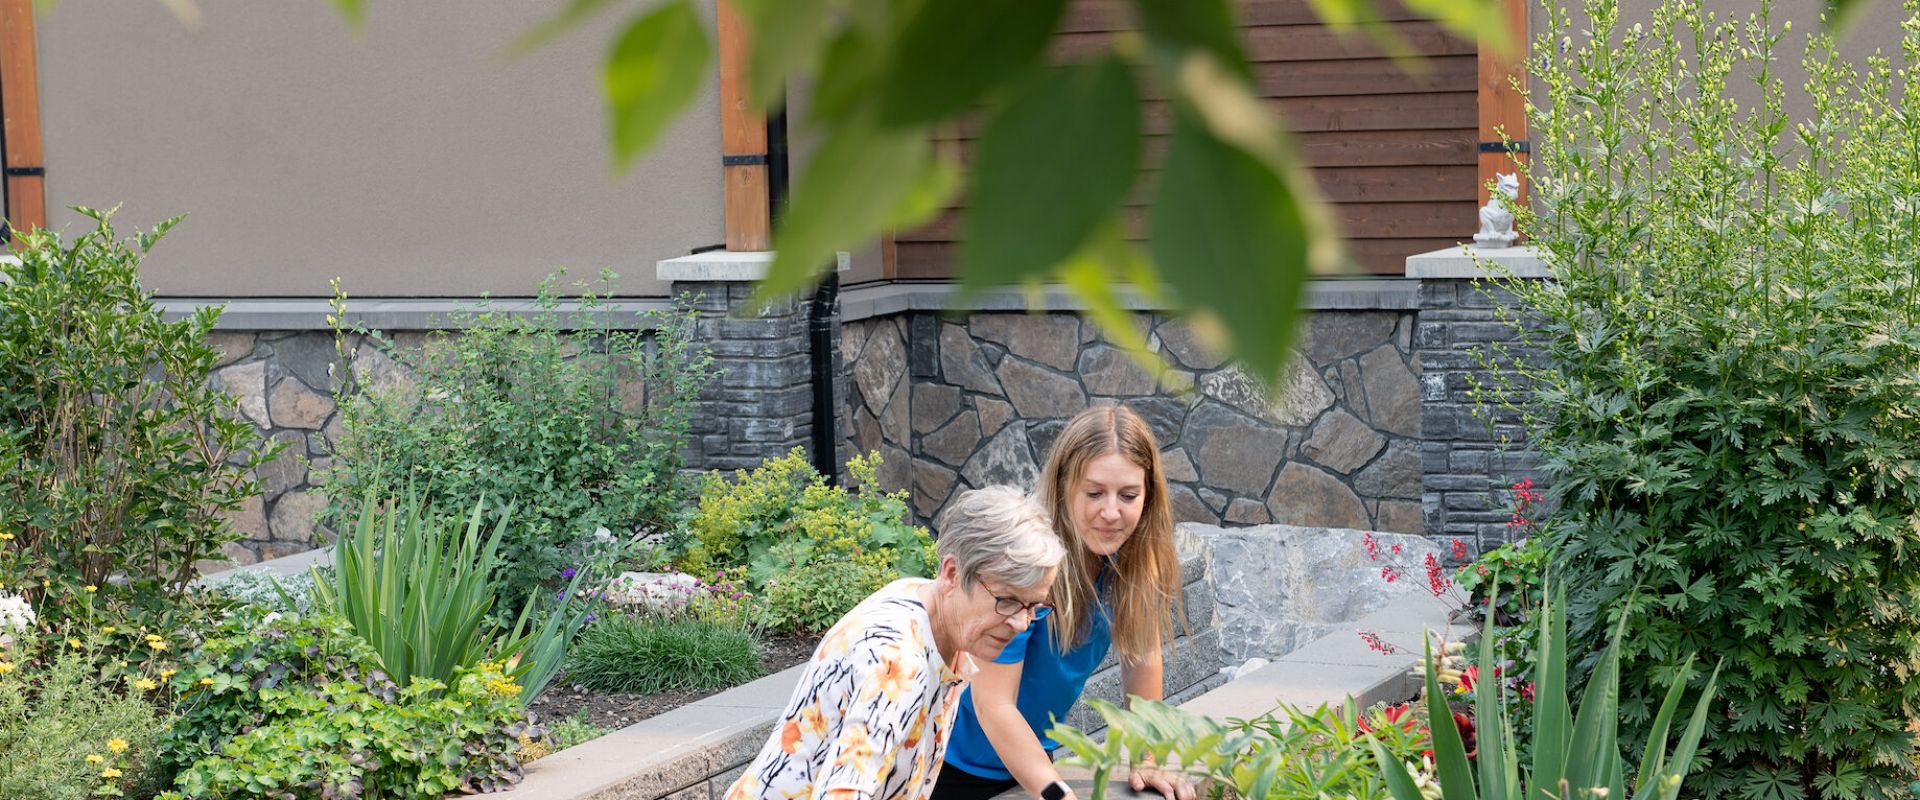 A female senior resident at Origin at Spring Creek and a Life Enrichment Coordinator in a blue uniform look at flowers and greenery in a garden space at Spring Creek